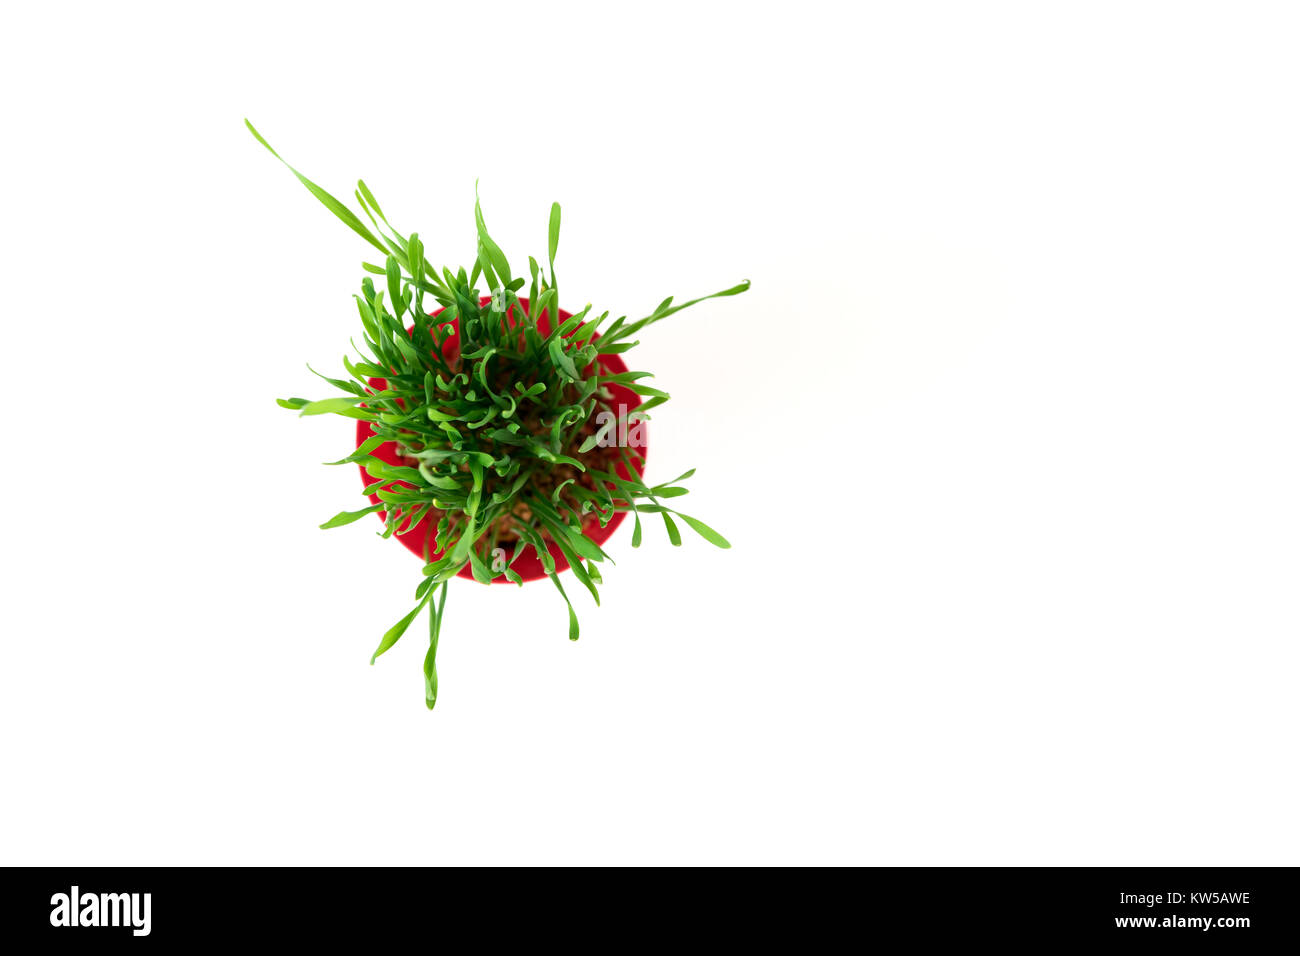 Young green Christmas wheat in a red flowerpot on a white background. Christmas symbol. Stock Photo